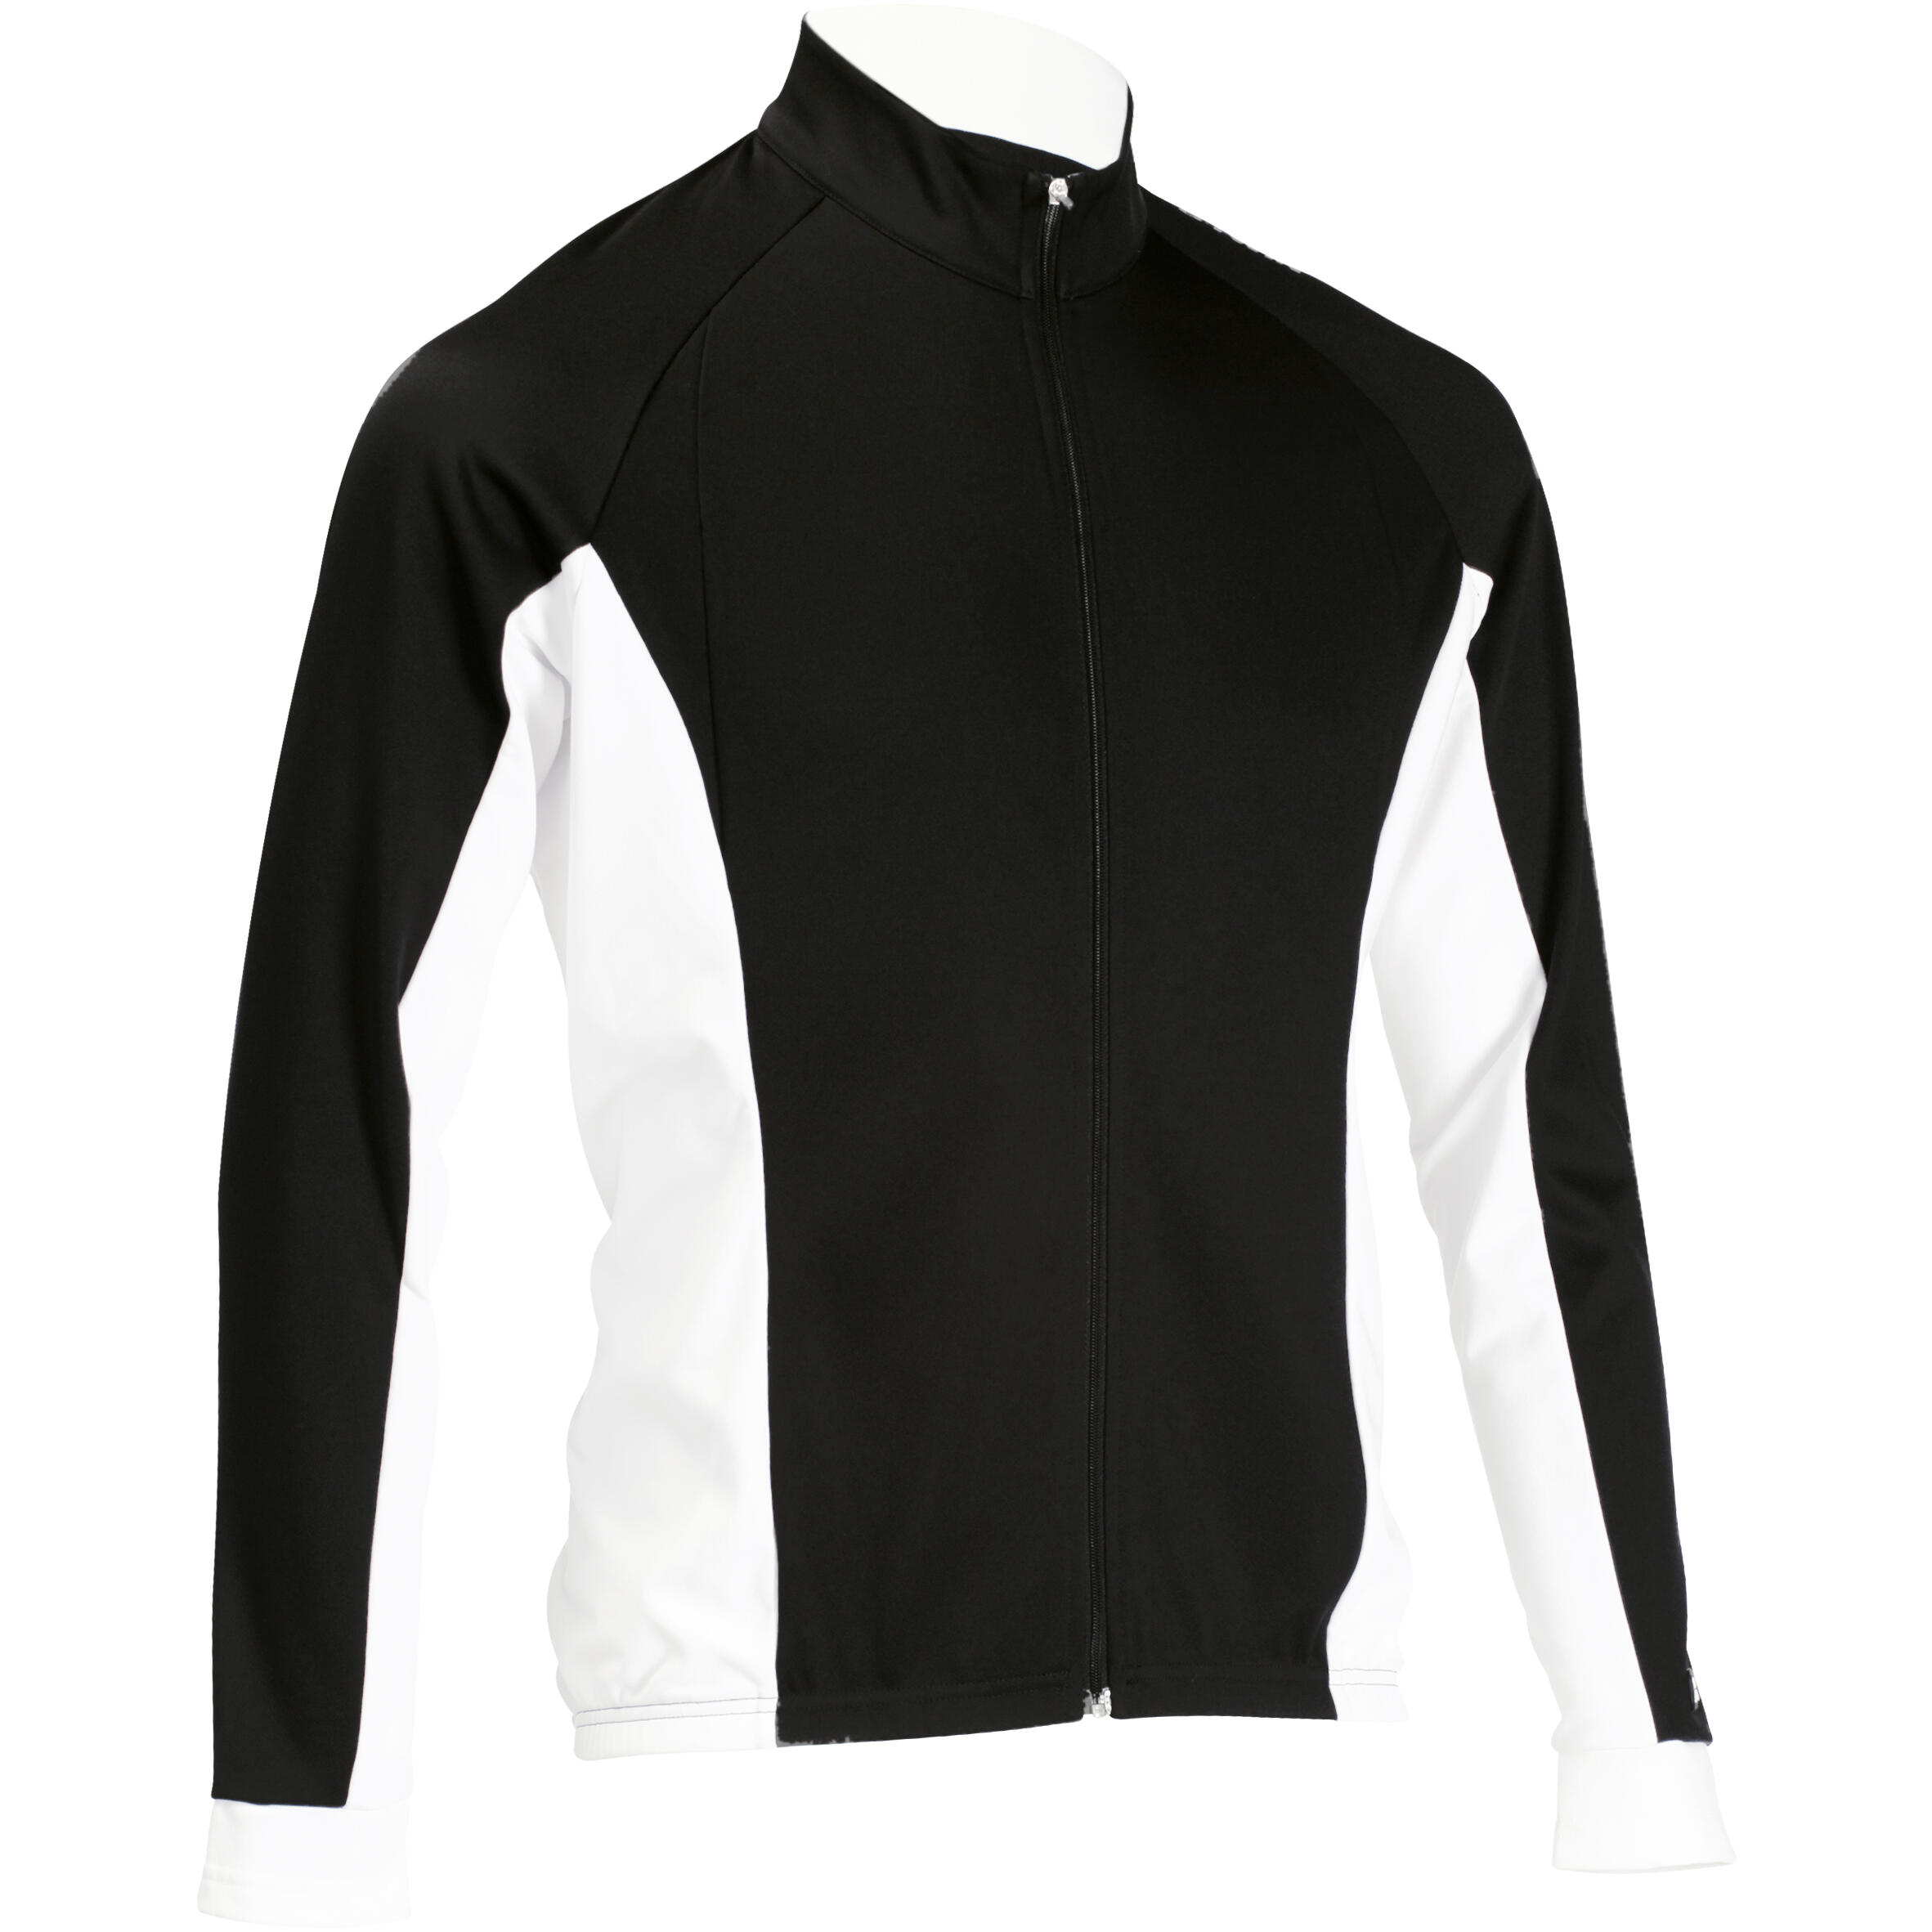 BTWIN 500 Long-Sleeved Cycling Jersey - Black/White